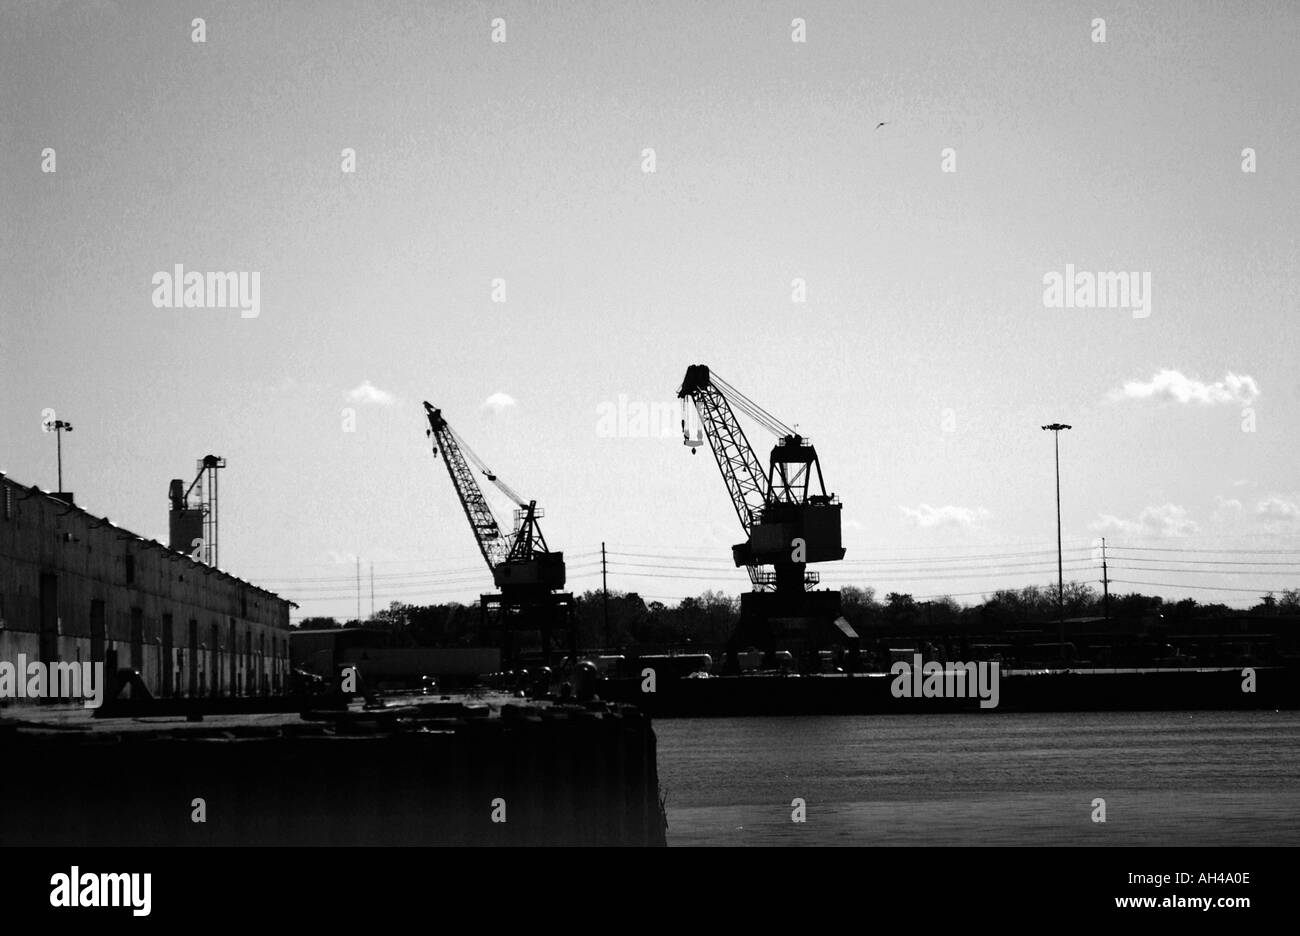 Two Cranes Silhouetted in the Afternoon Black and White USA Stock Photo